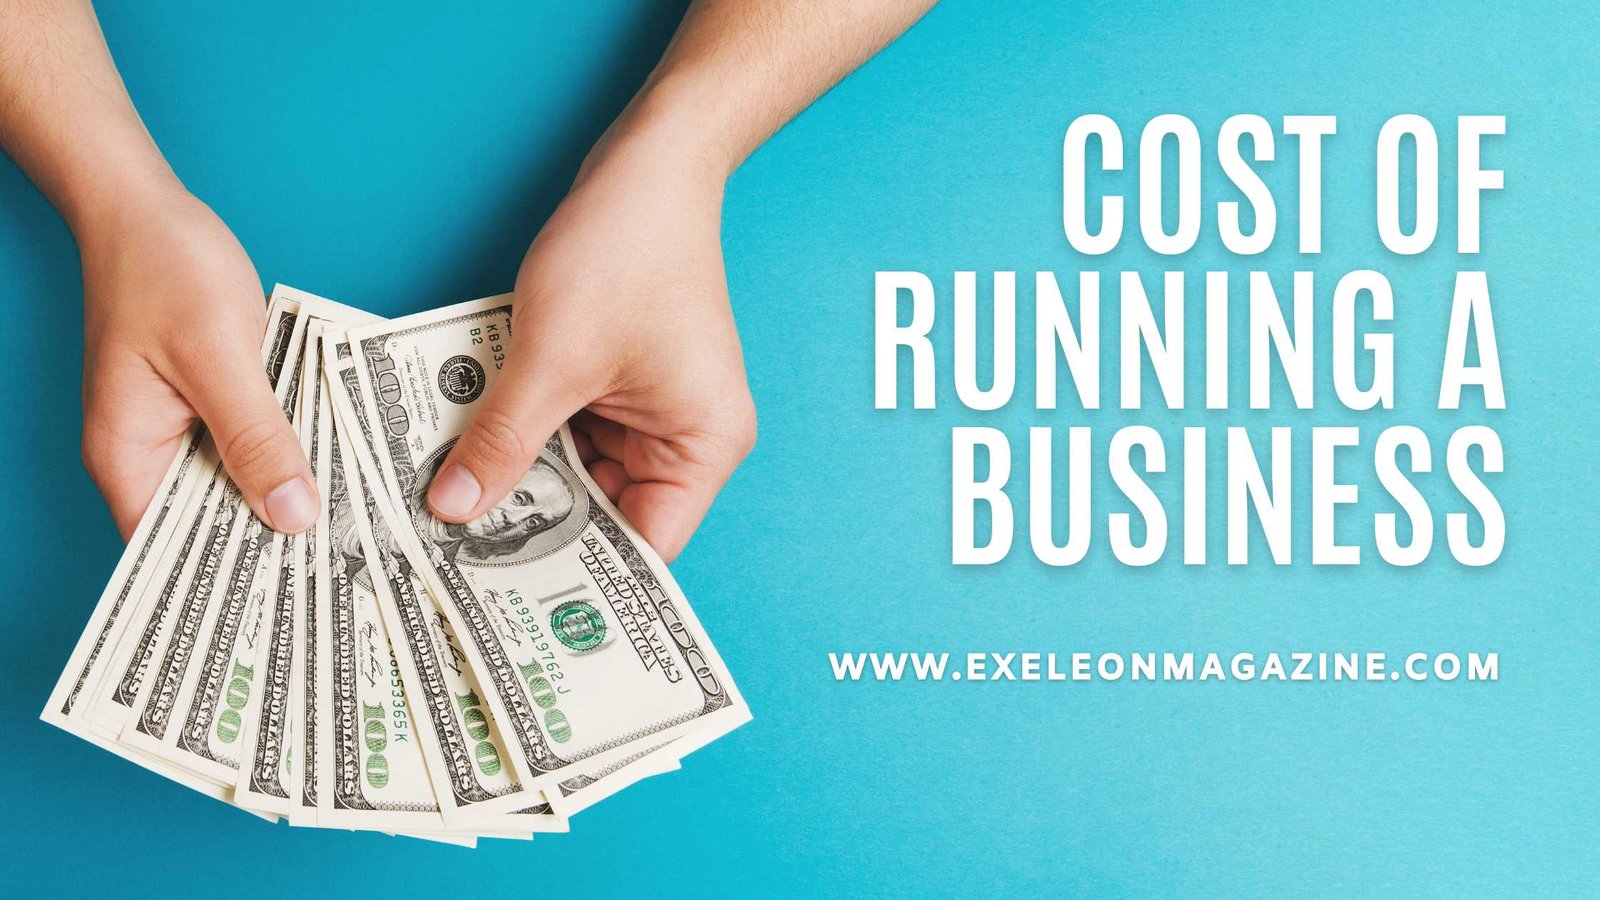 Costs of Running a Business and How to Reduce Them